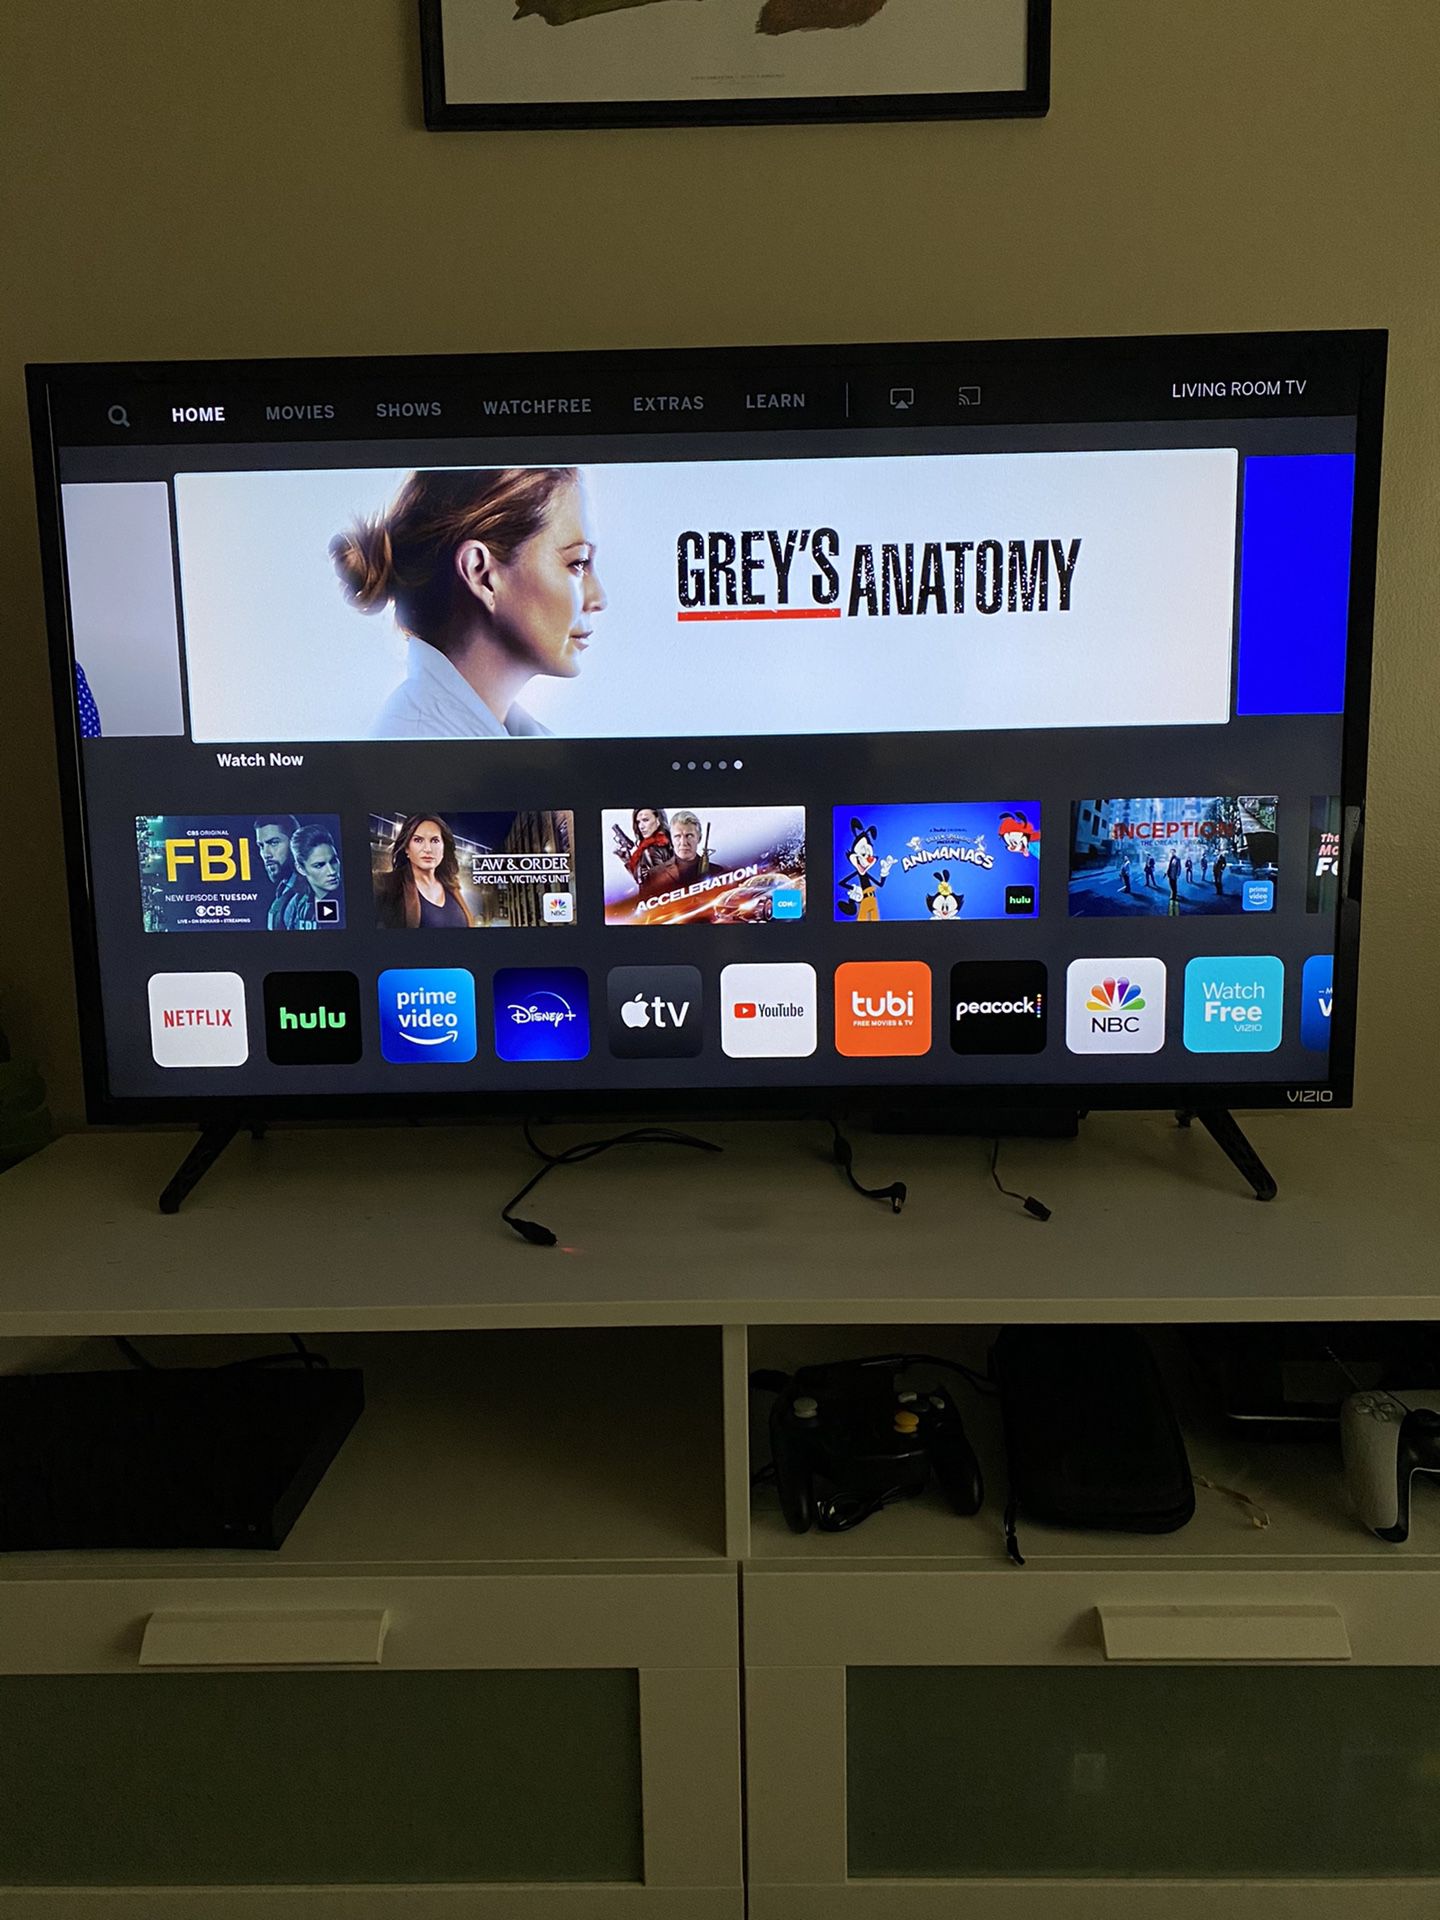 VIZIO 43” SMART LED TV FHD | BUILT-IN WIFI STREAMING APPS & CHROMECAST/AIRPLAY | BLU-RAY INCLUDED